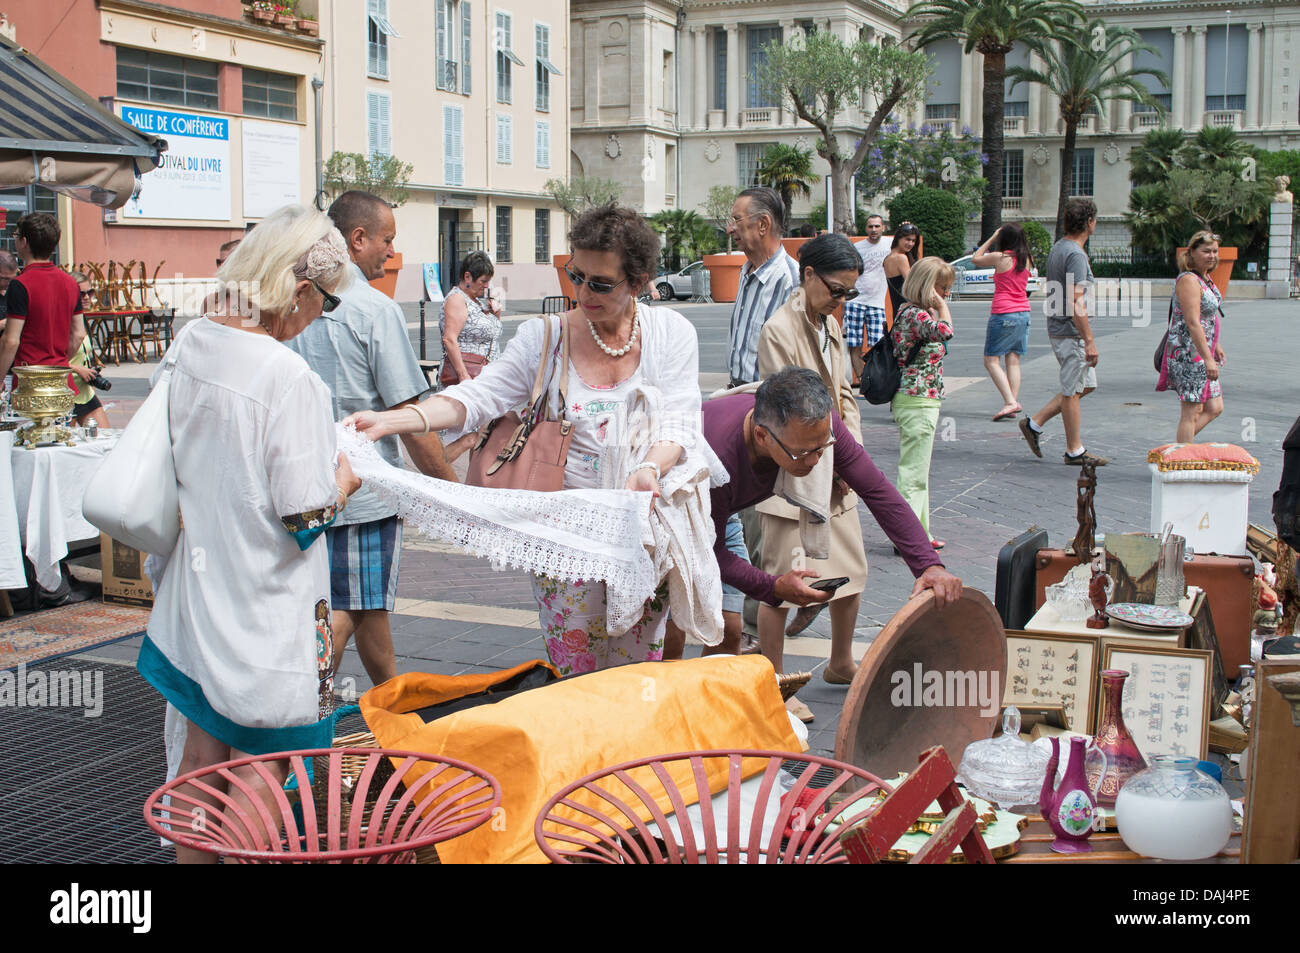 People browsing through goods on a stall at Nice antiques market, France Stock Photo